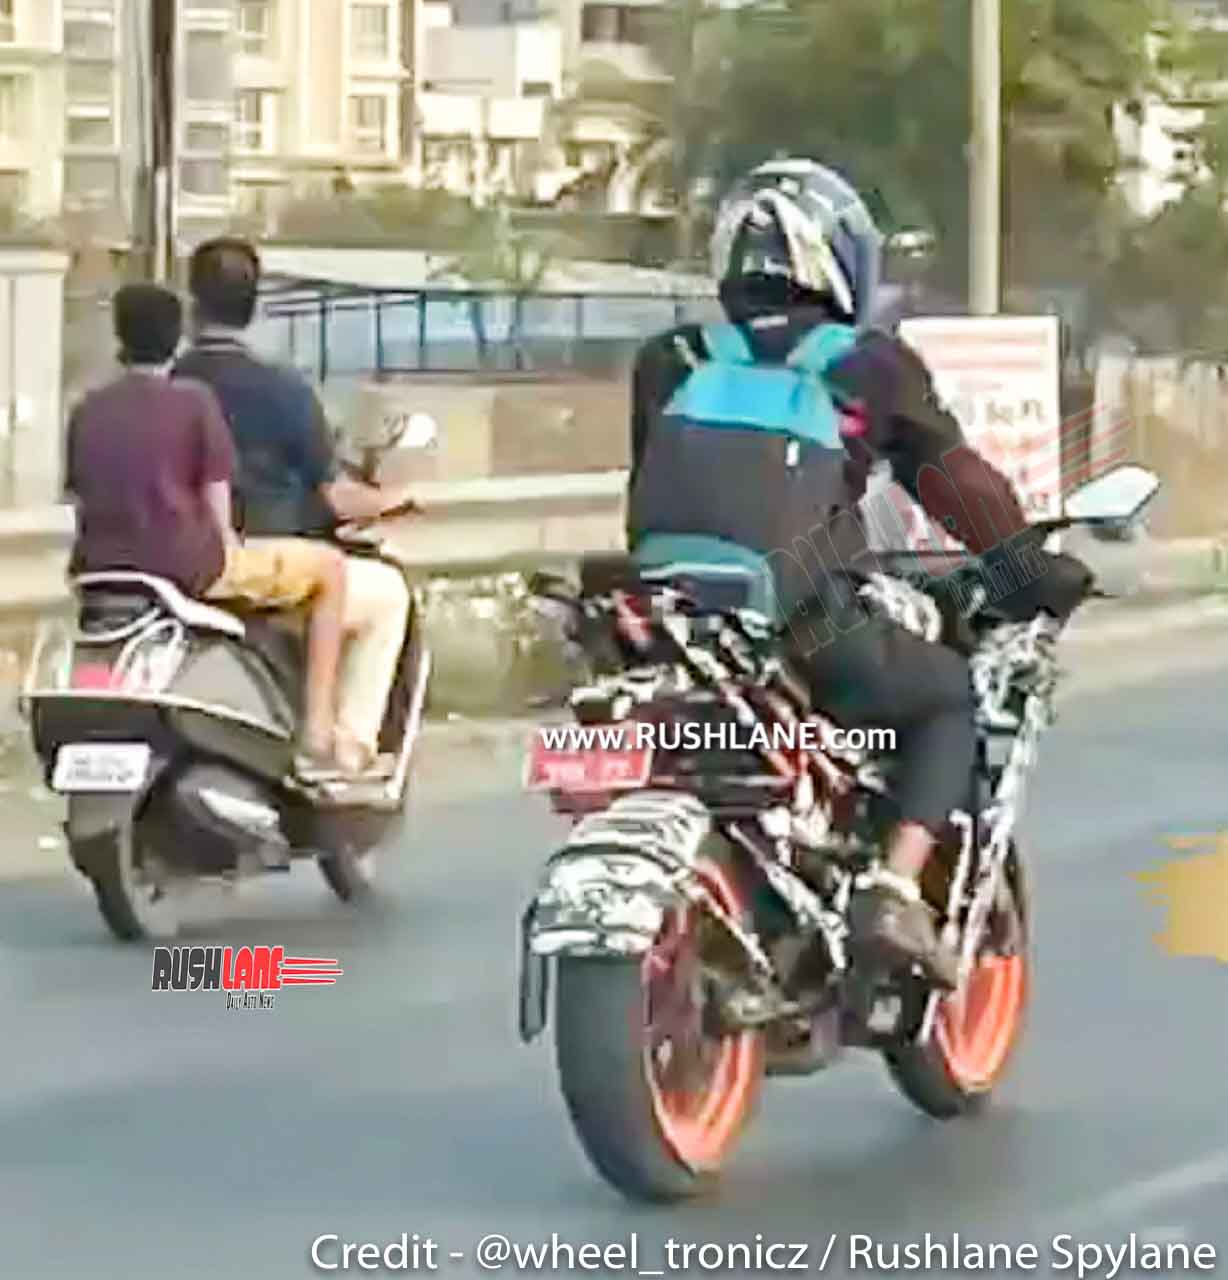 Next-Gen KTM RC 200 Sportbike Spotted Testing in India